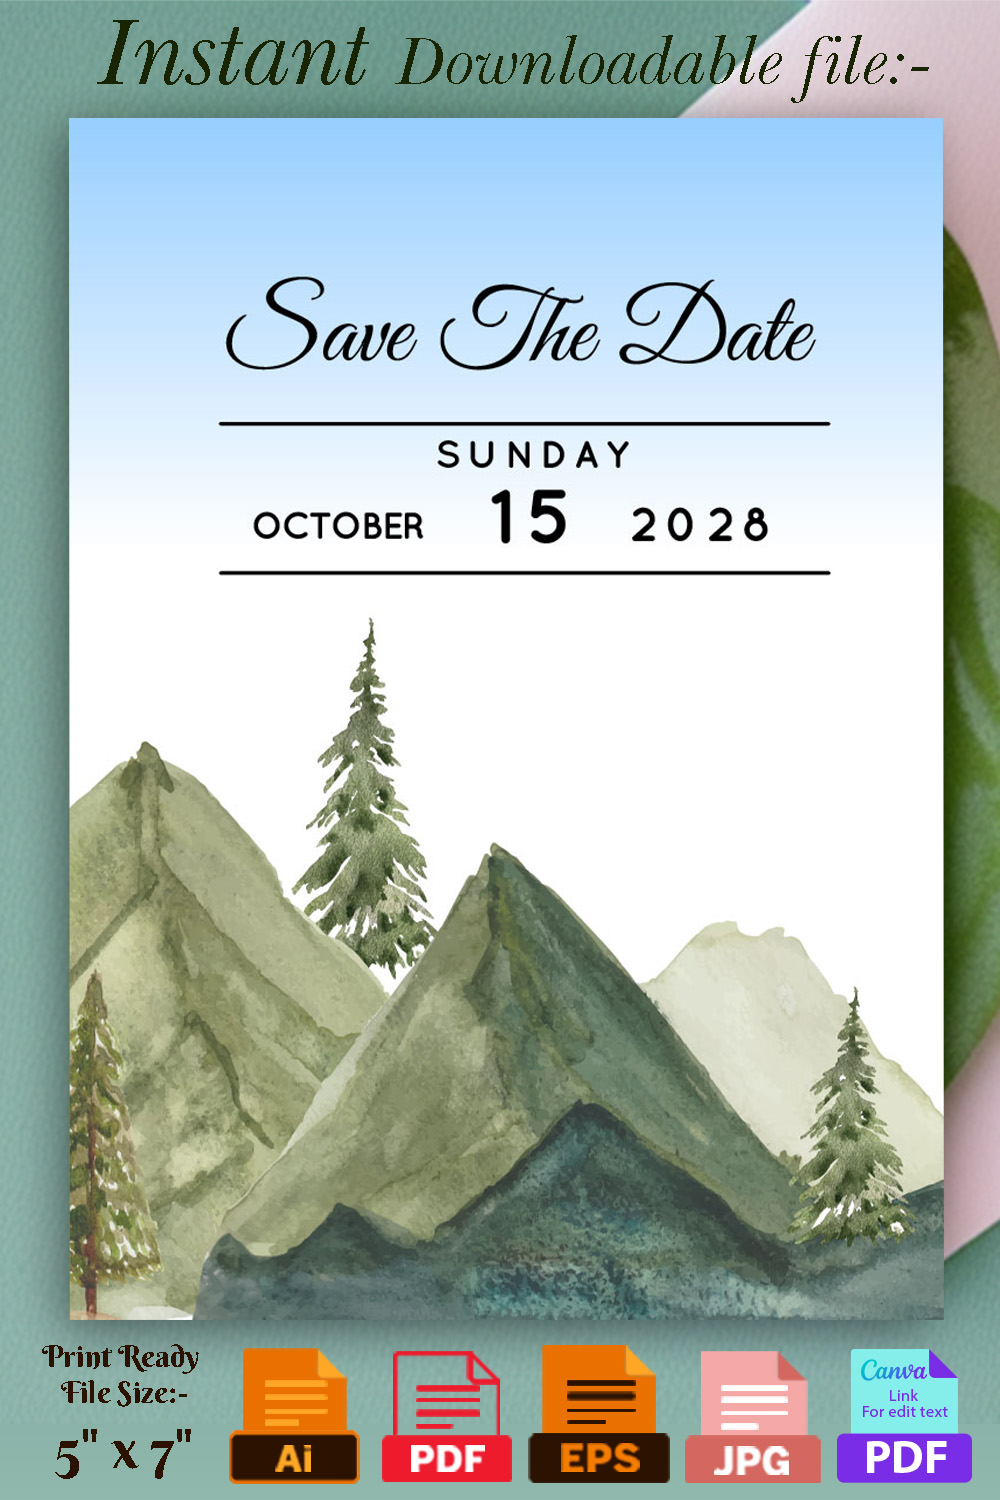 Image of a gorgeous wedding card with landscape design